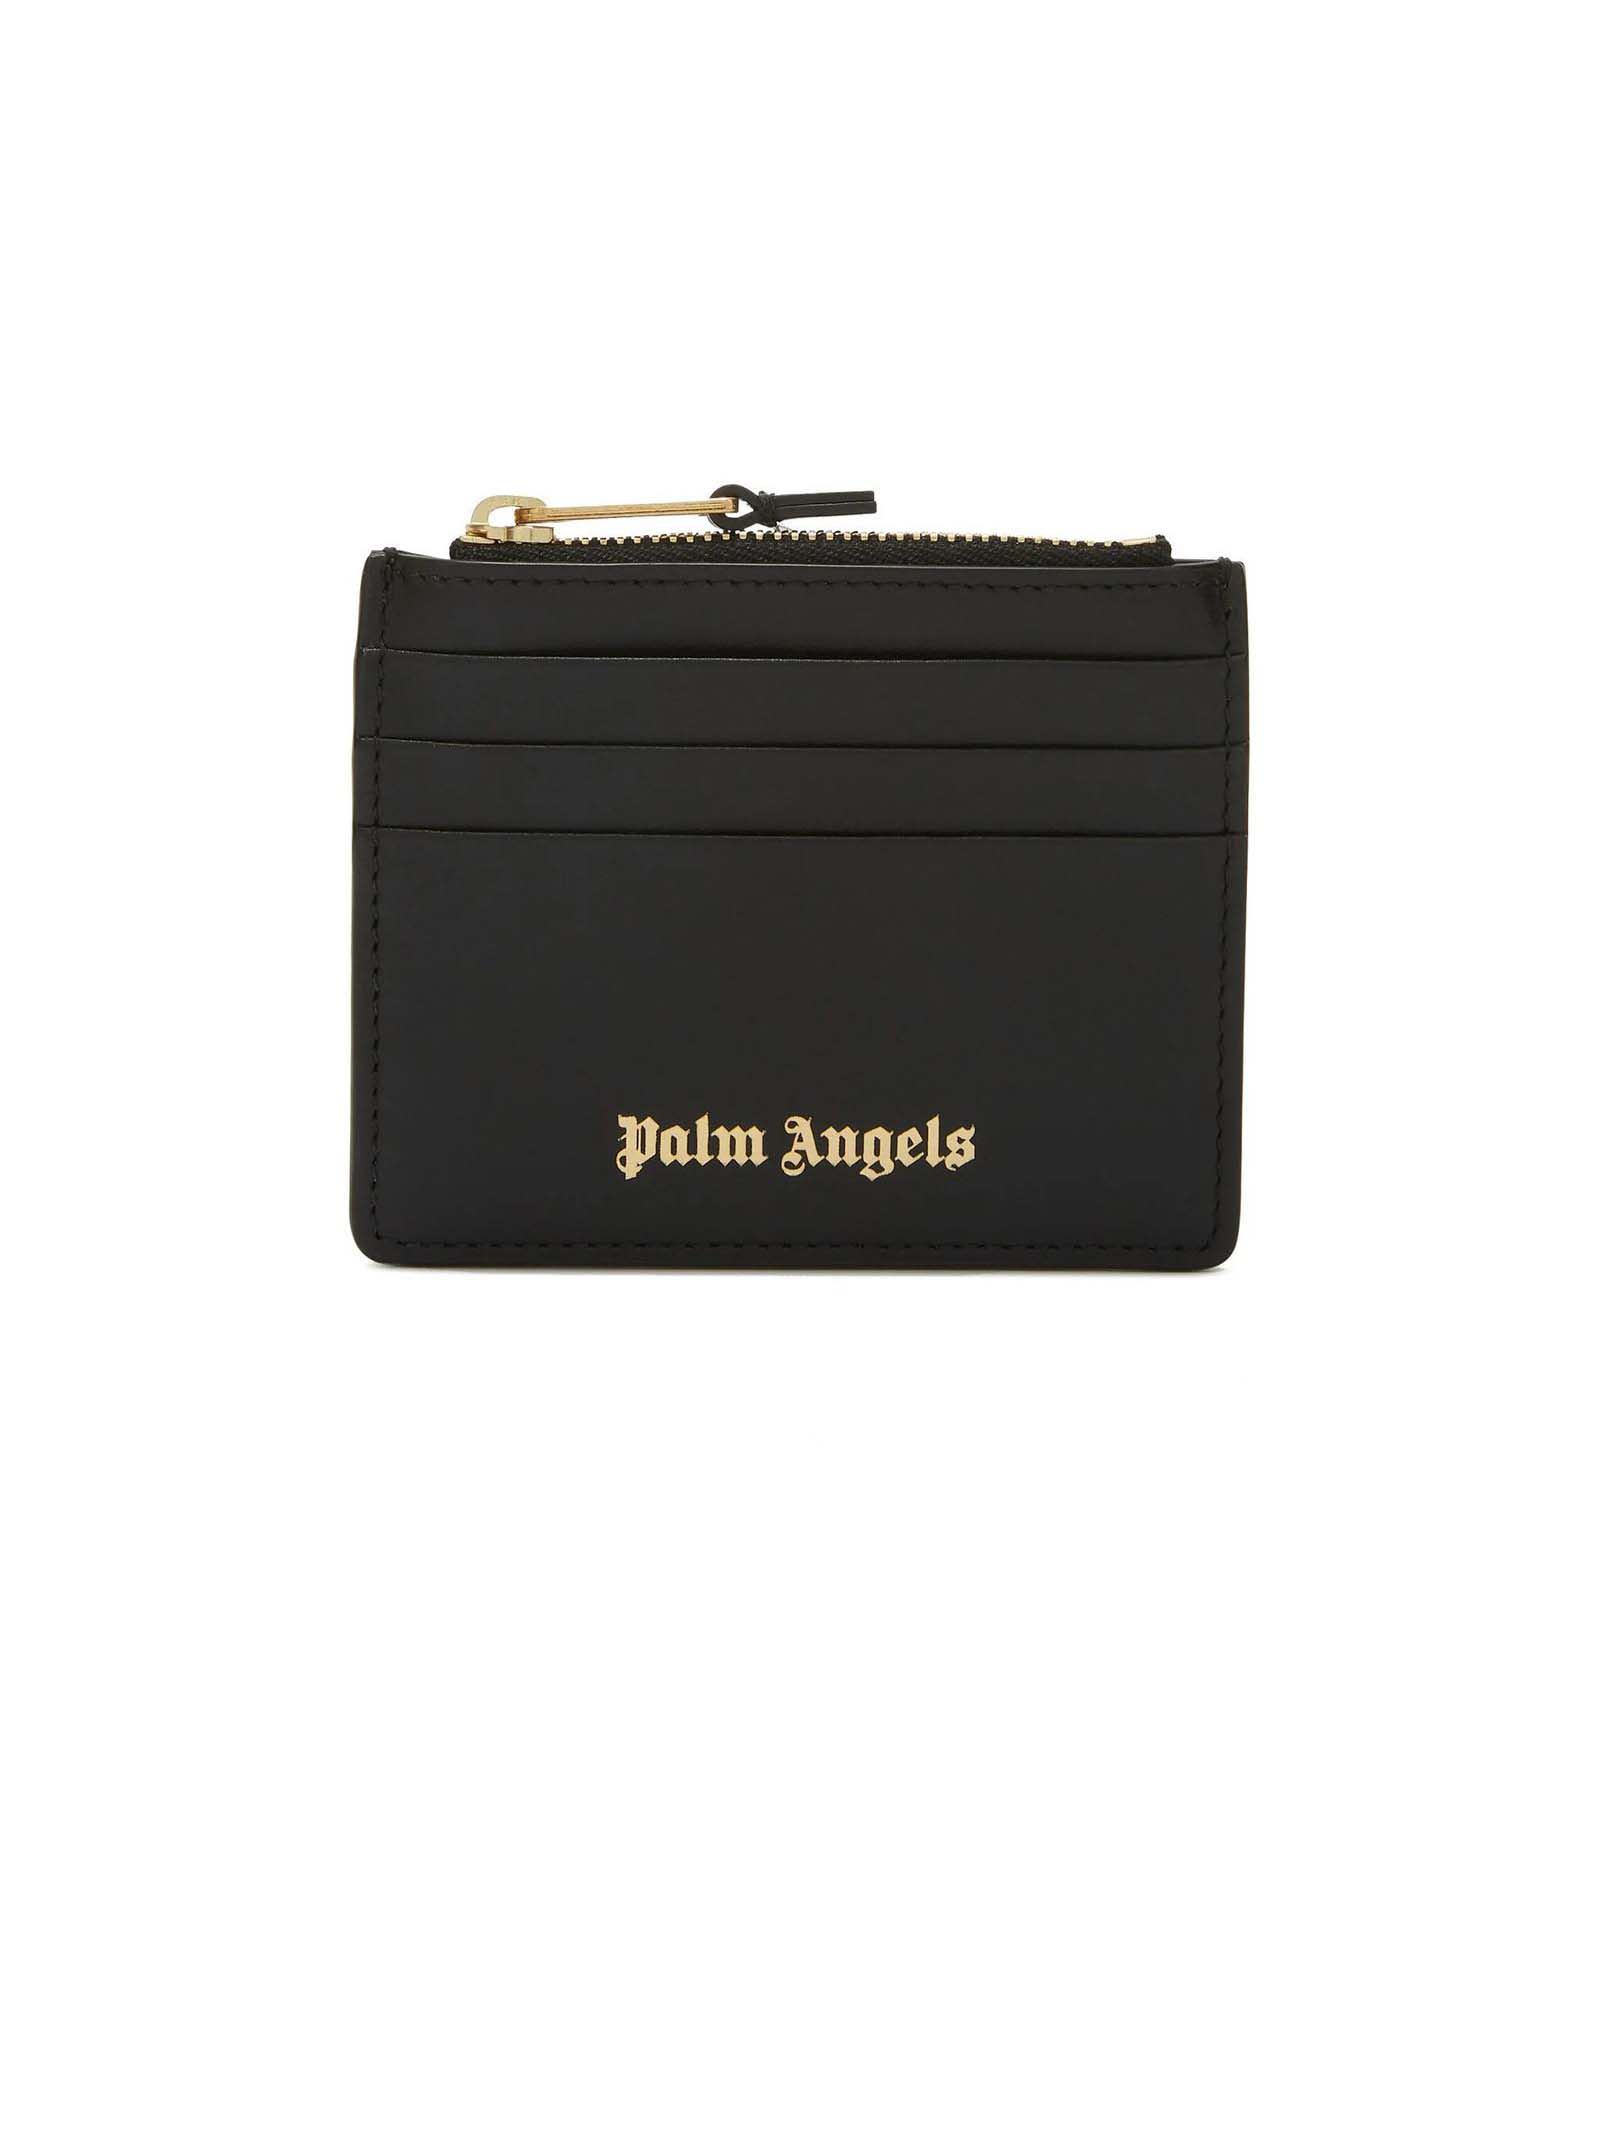 Palm Angels Card Case